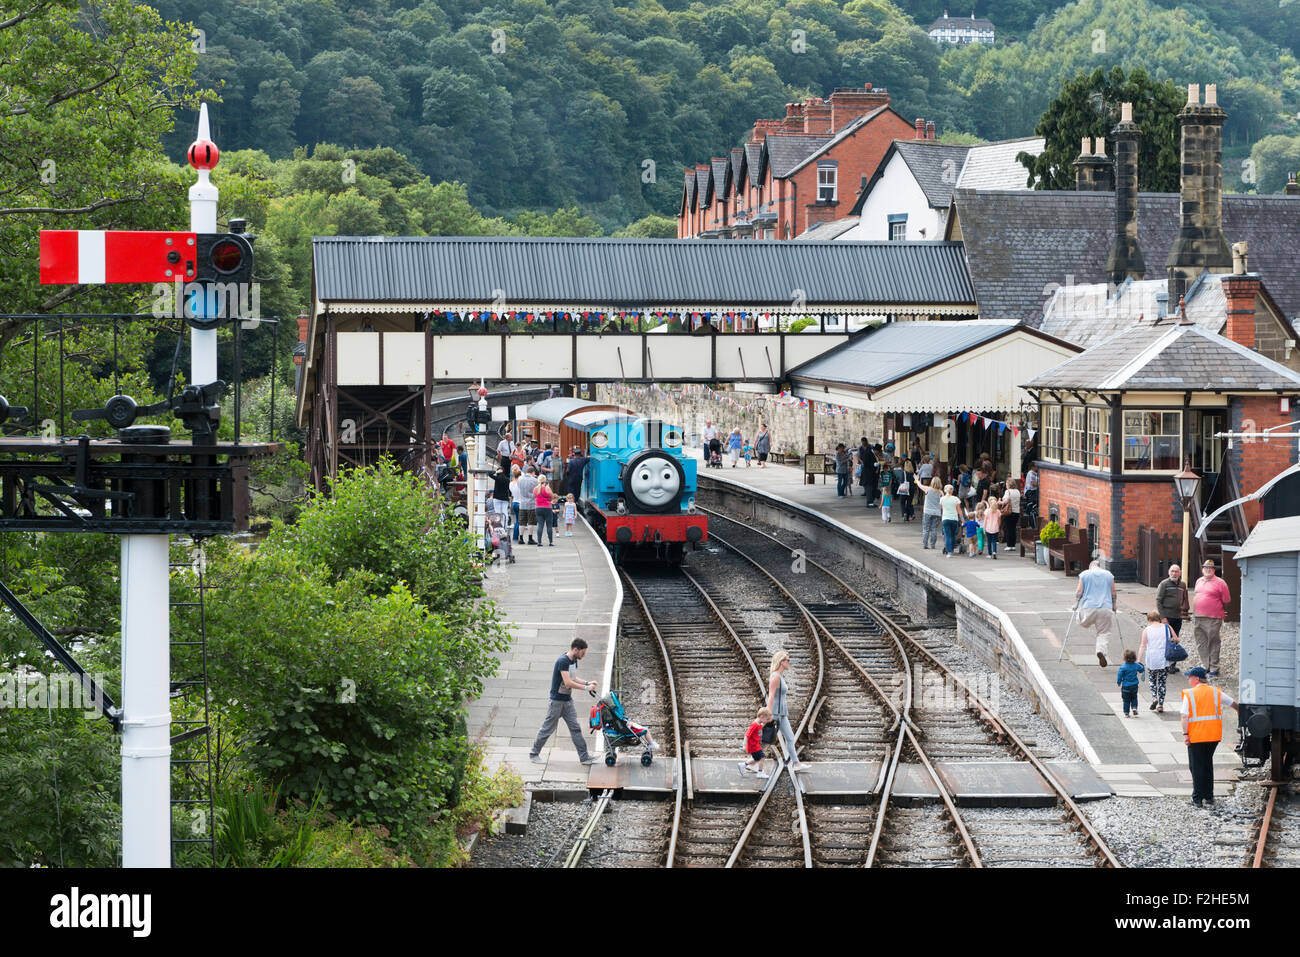 Steam train Thomas the tank engine at Llangollen railway station during a special event day with people on the platform, UK Stock Photo